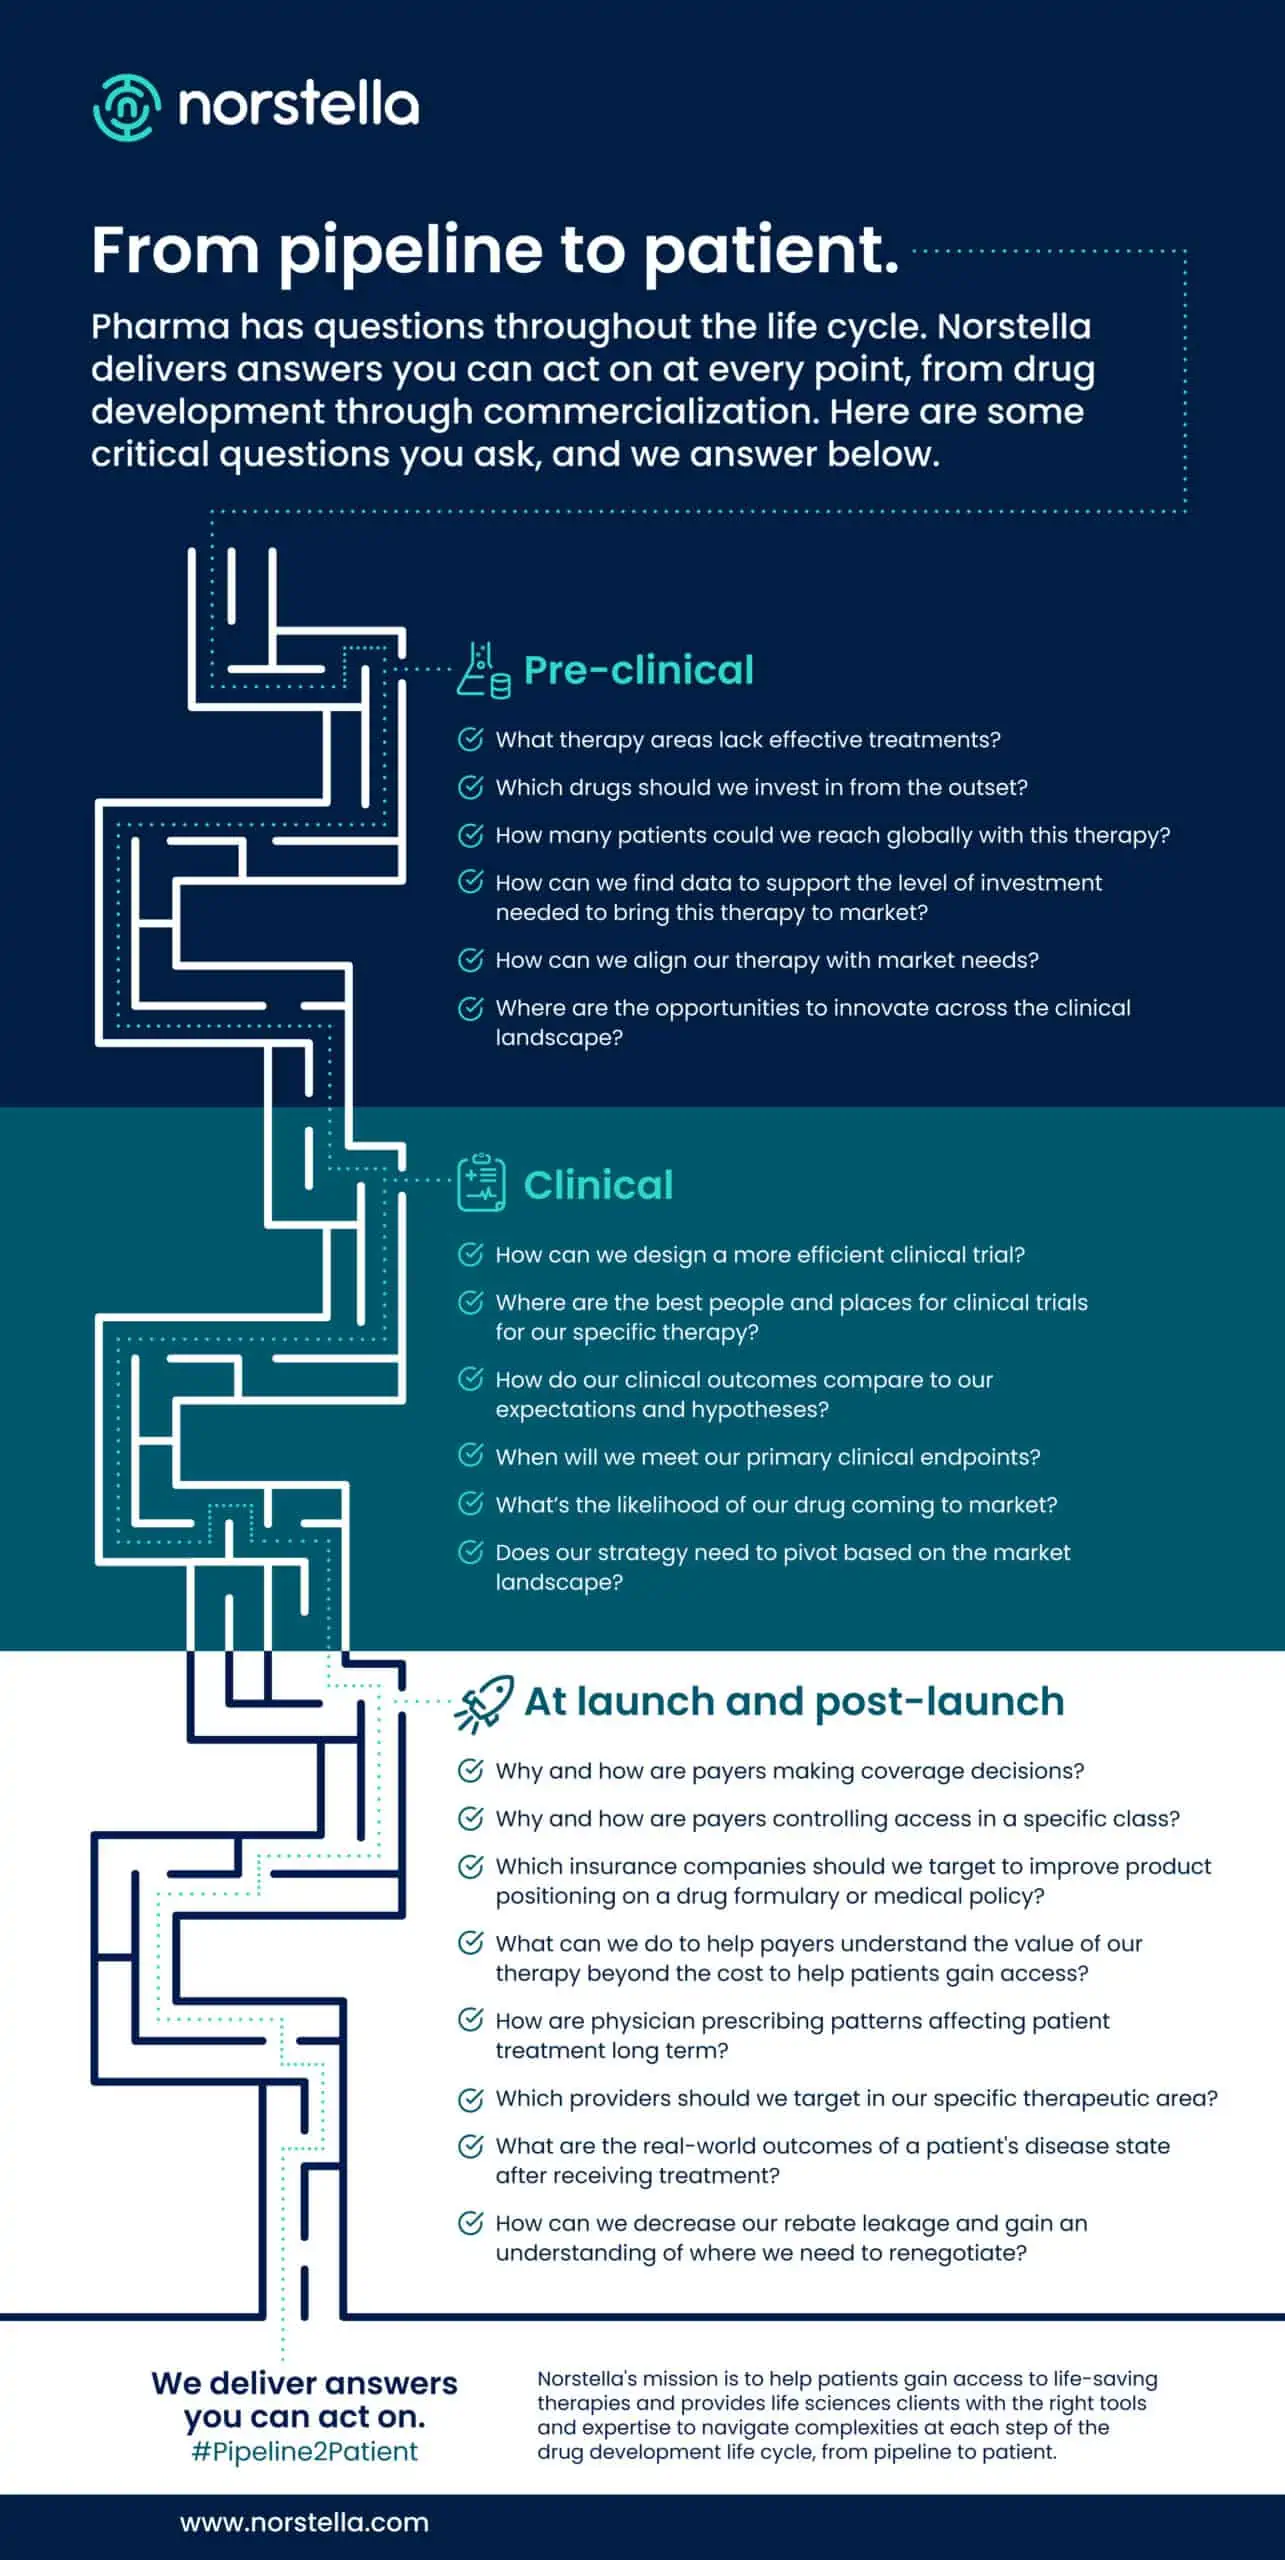 Norstella Pipeline to Patient infographic